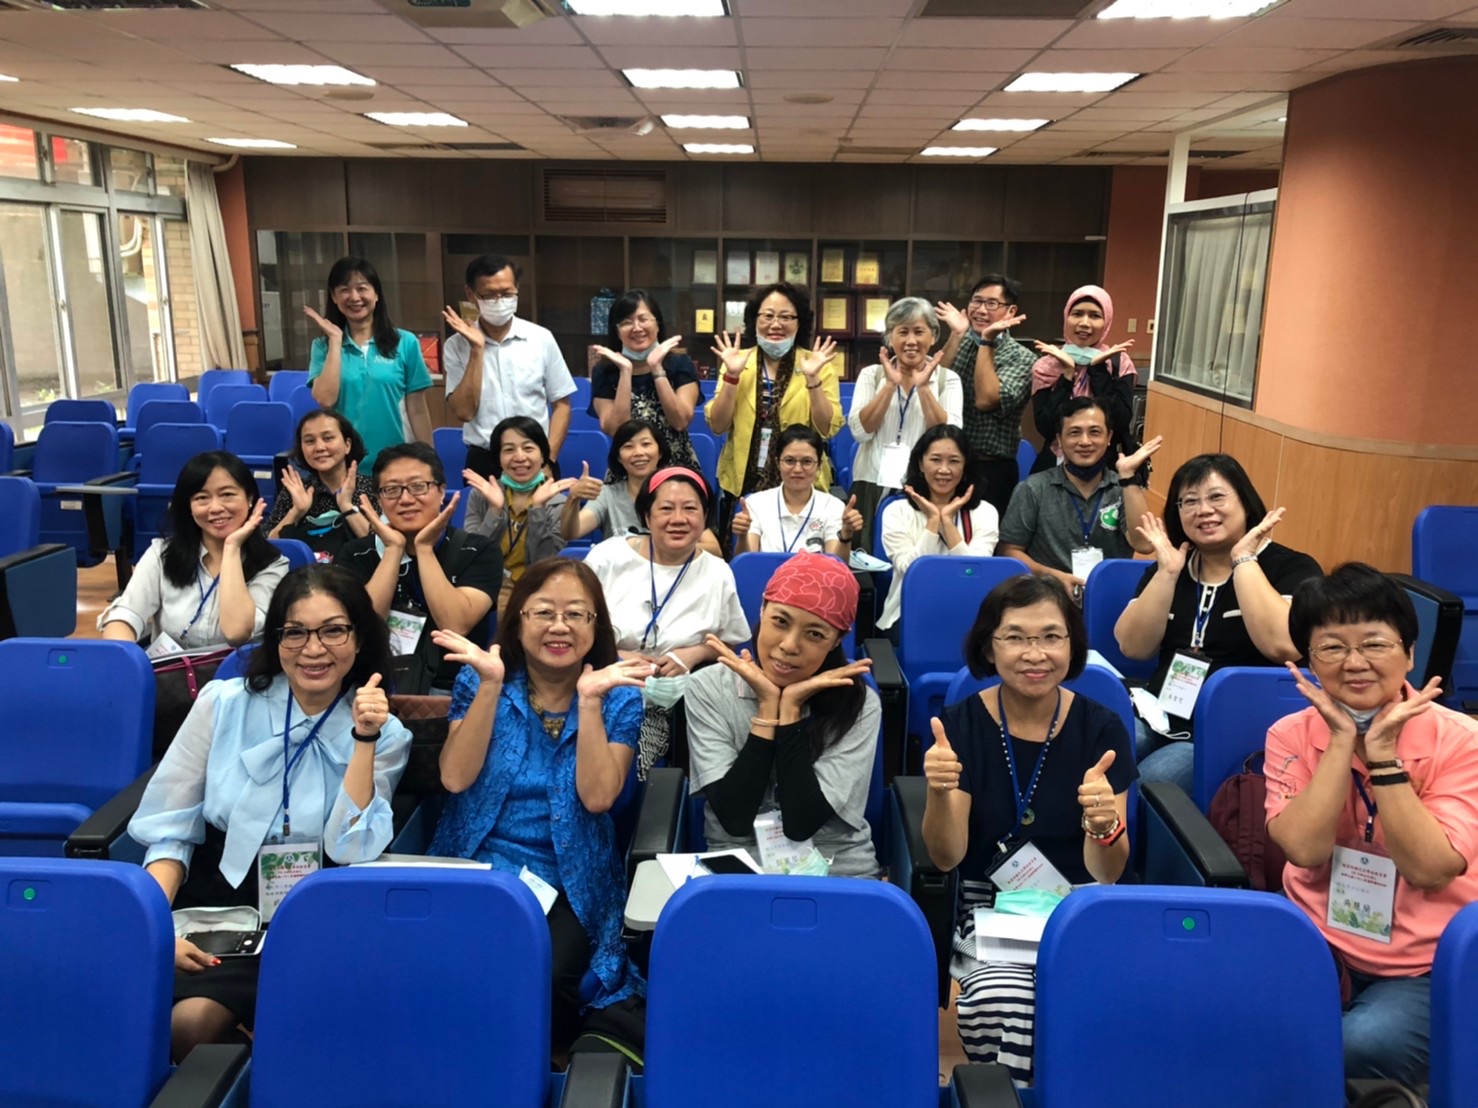 Yan Yong Zhen (second row, first from left) participates in the New Immigrant Language instructor training in 2020. (Photo / Provided by顏永真)